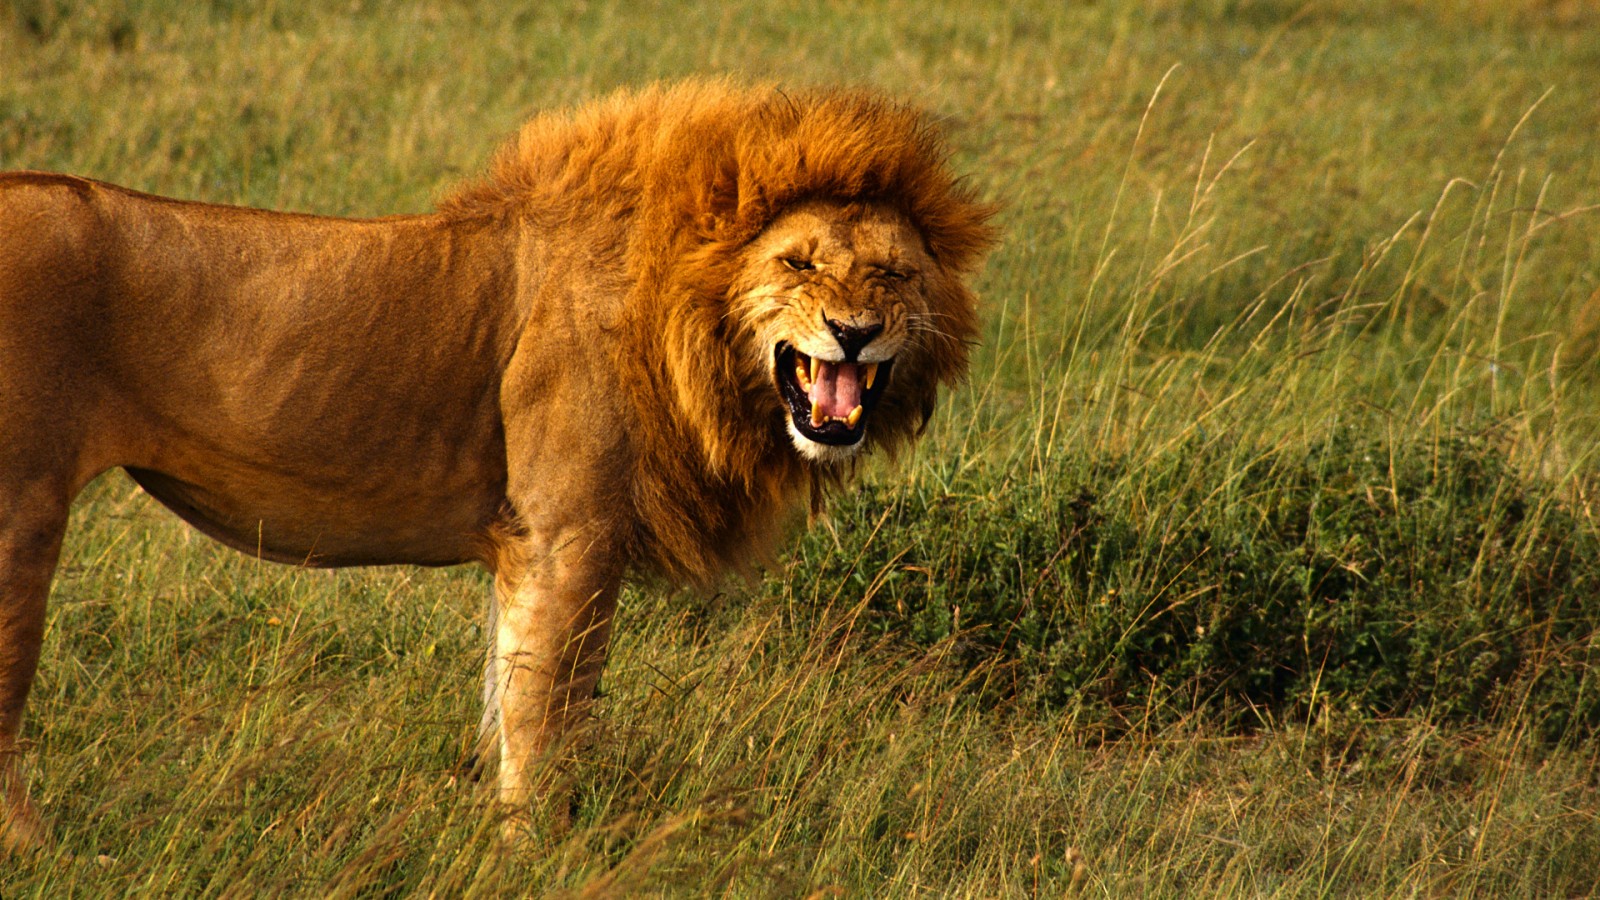 pictures of angry lions download